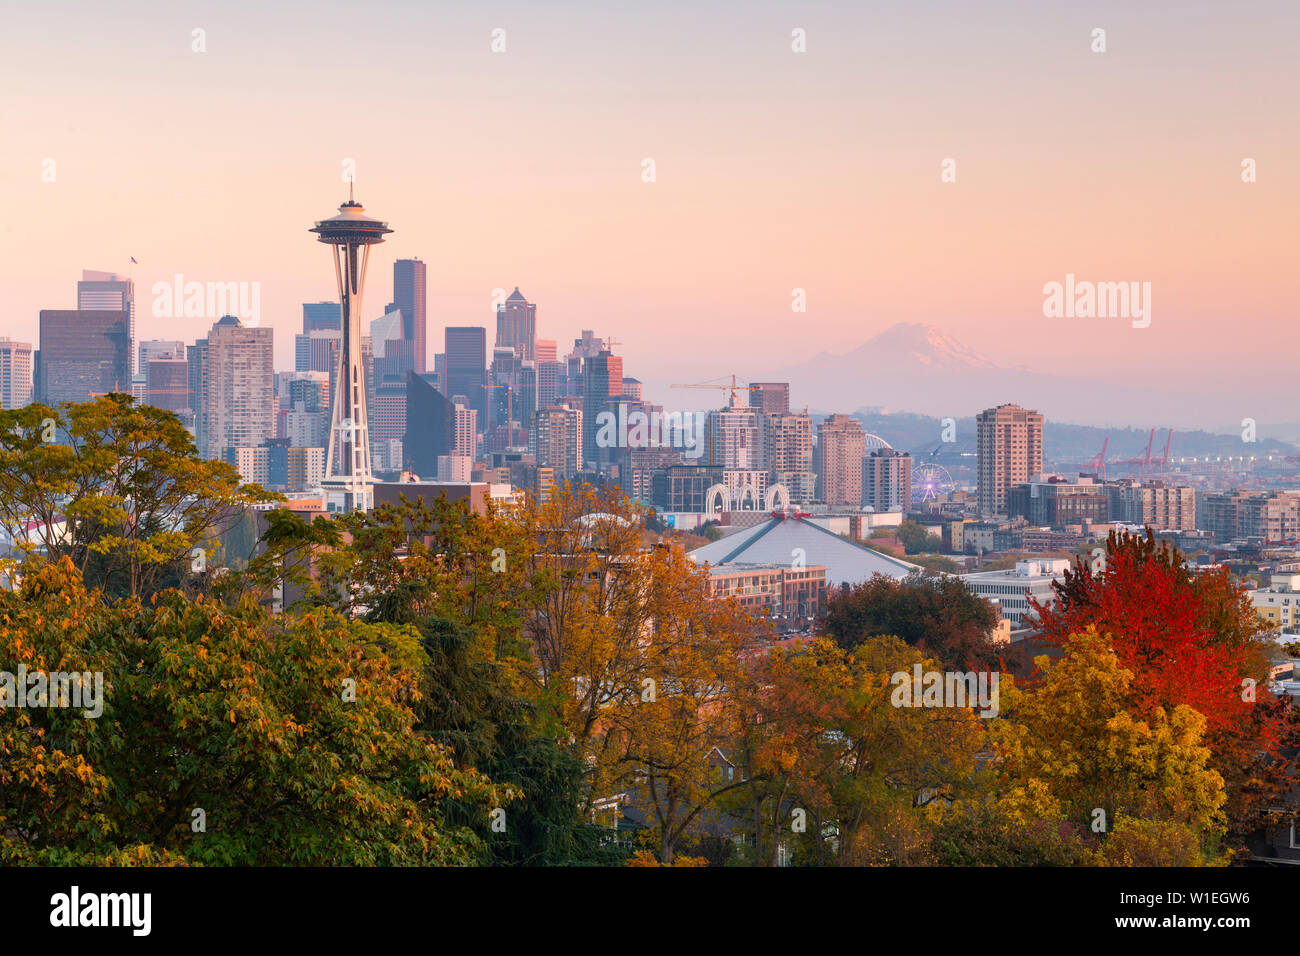 View of the Space Needle from Kerry Park, Seattle, Washington State, United States of America, North America Stock Photo